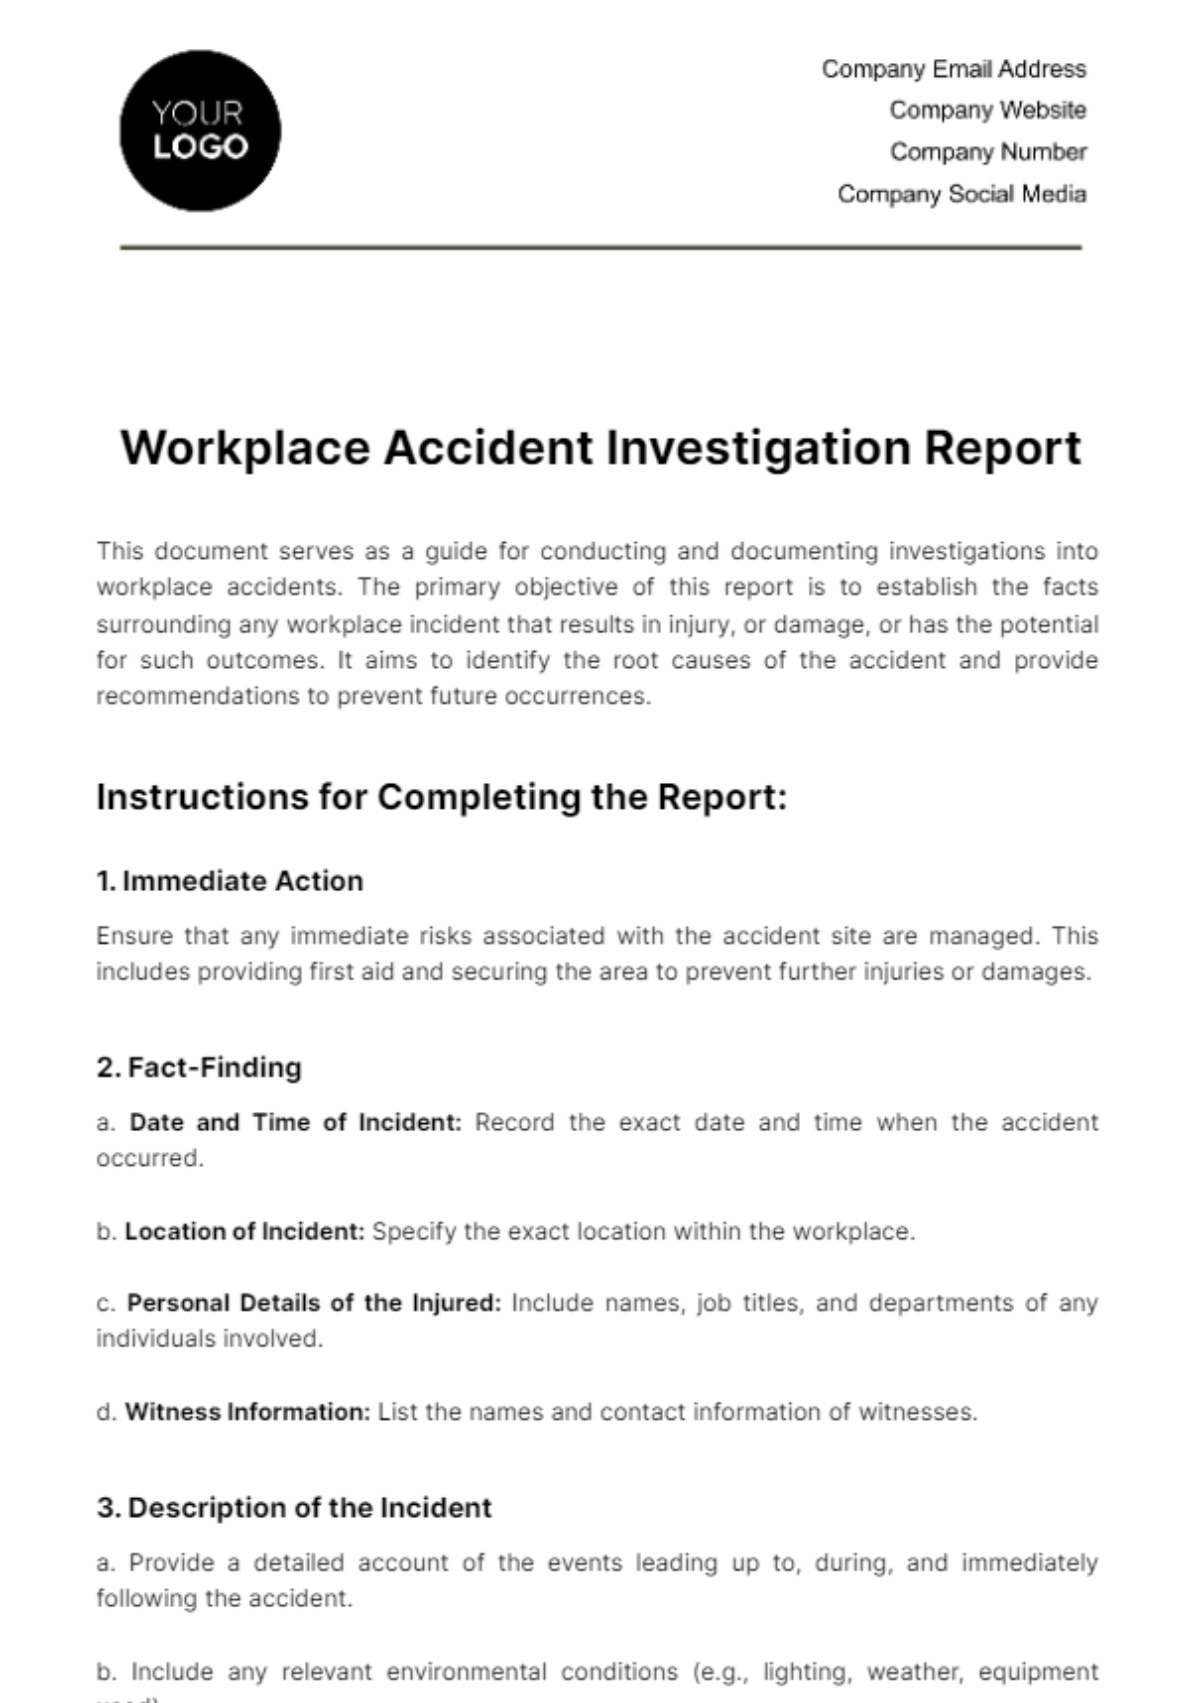 Workplace Accident Investigation Report Template